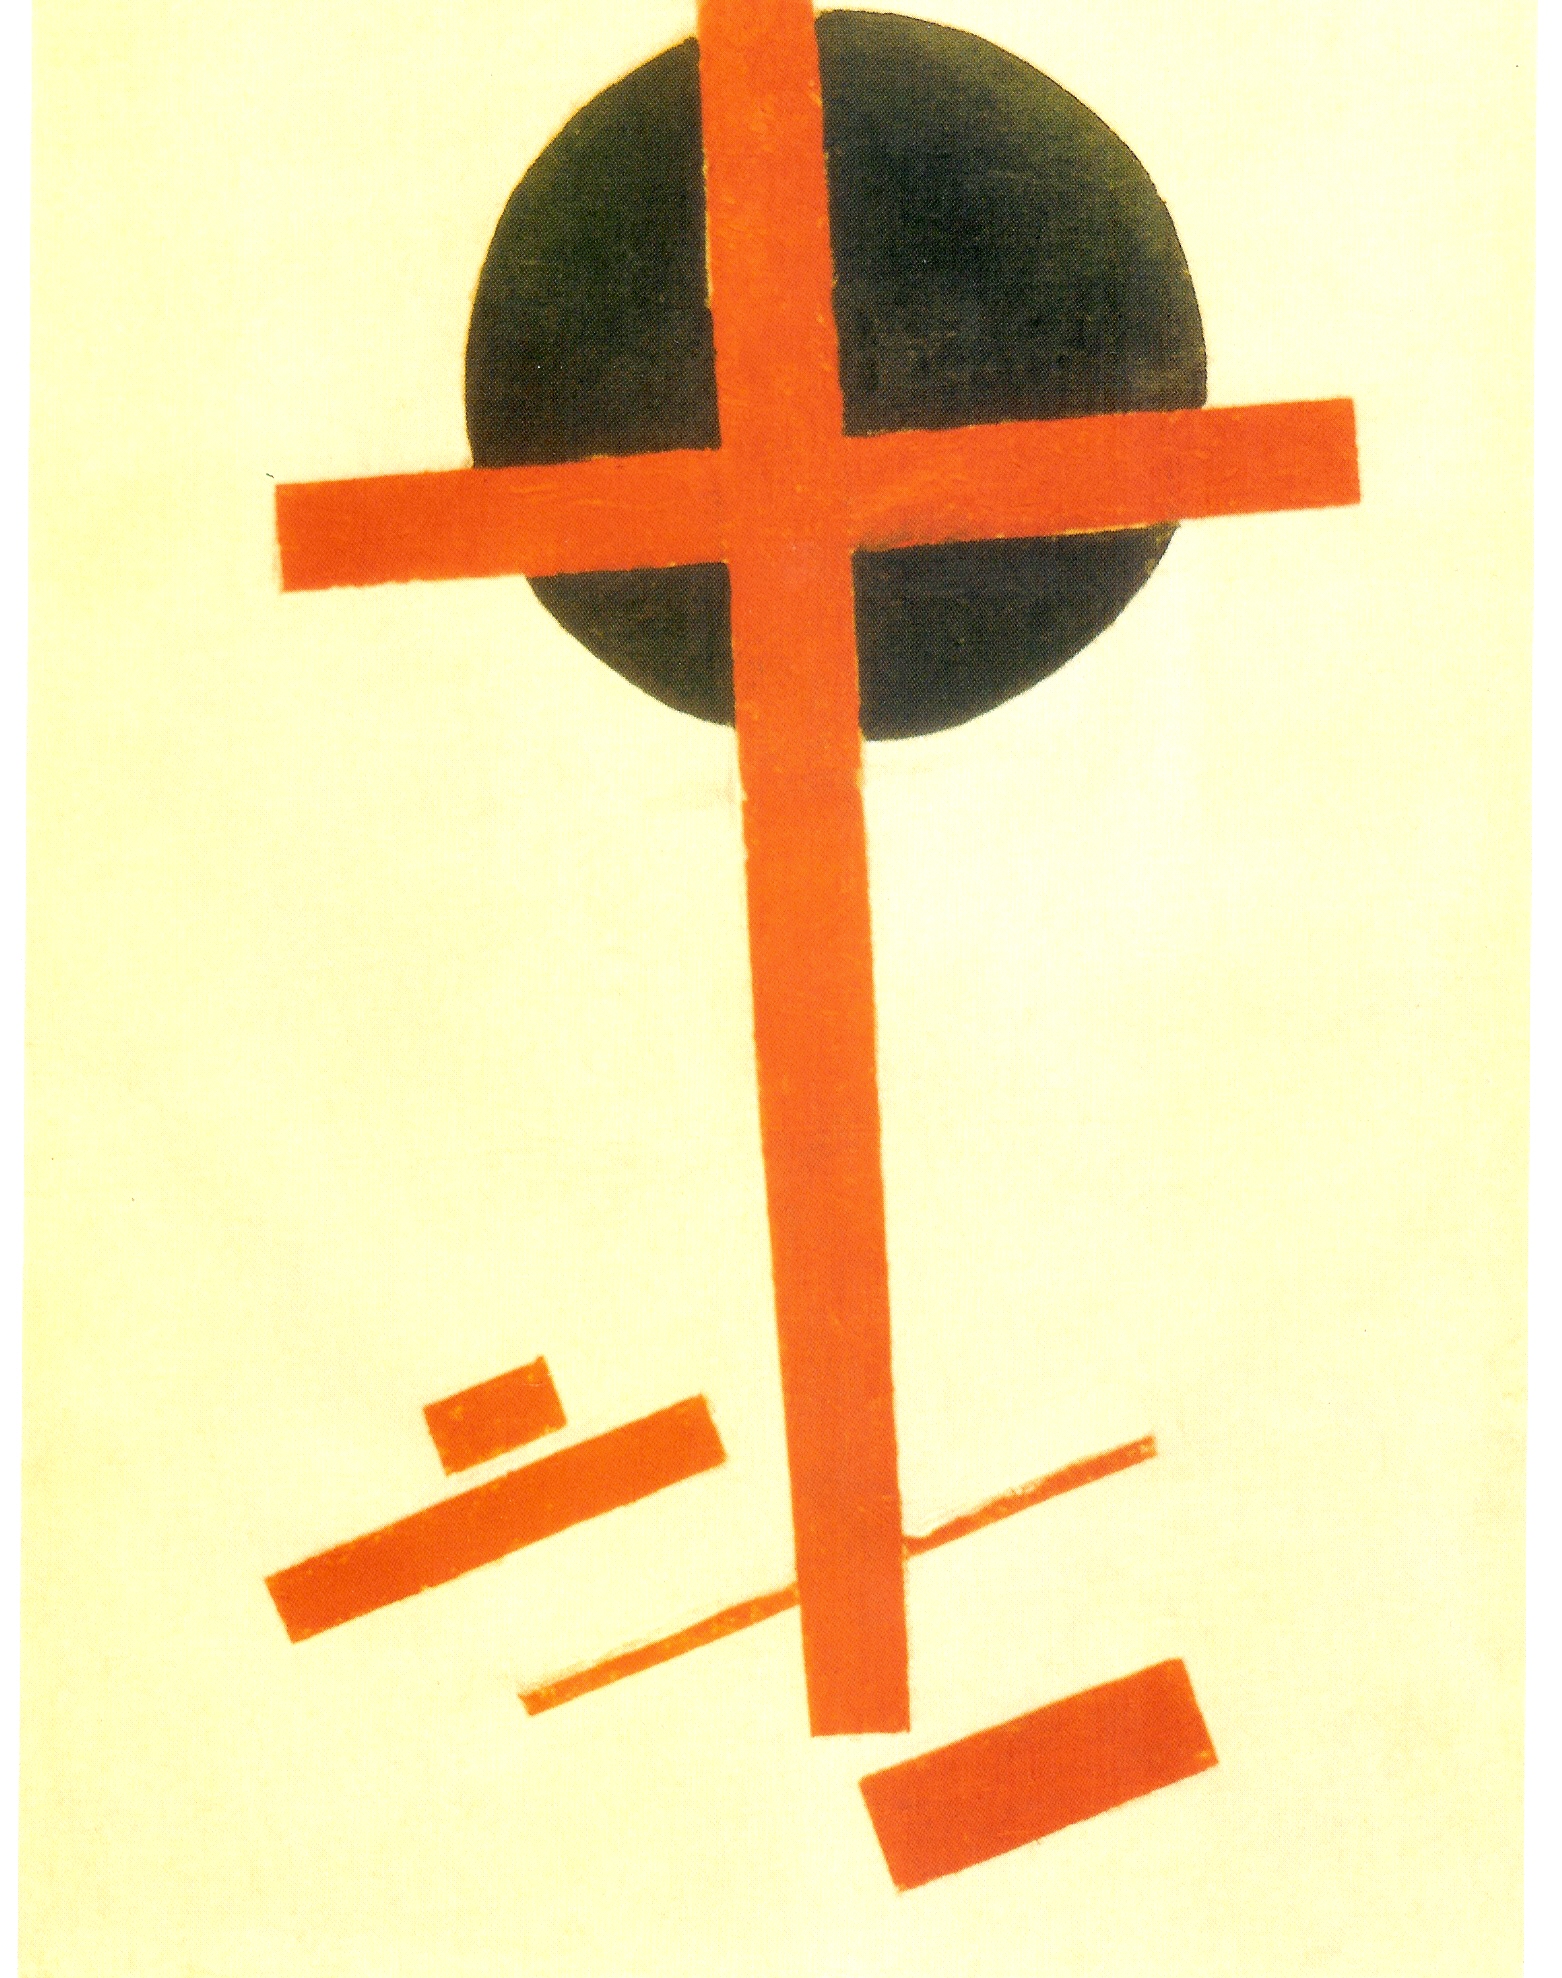 The Red Cross on a Black Circle (1915).